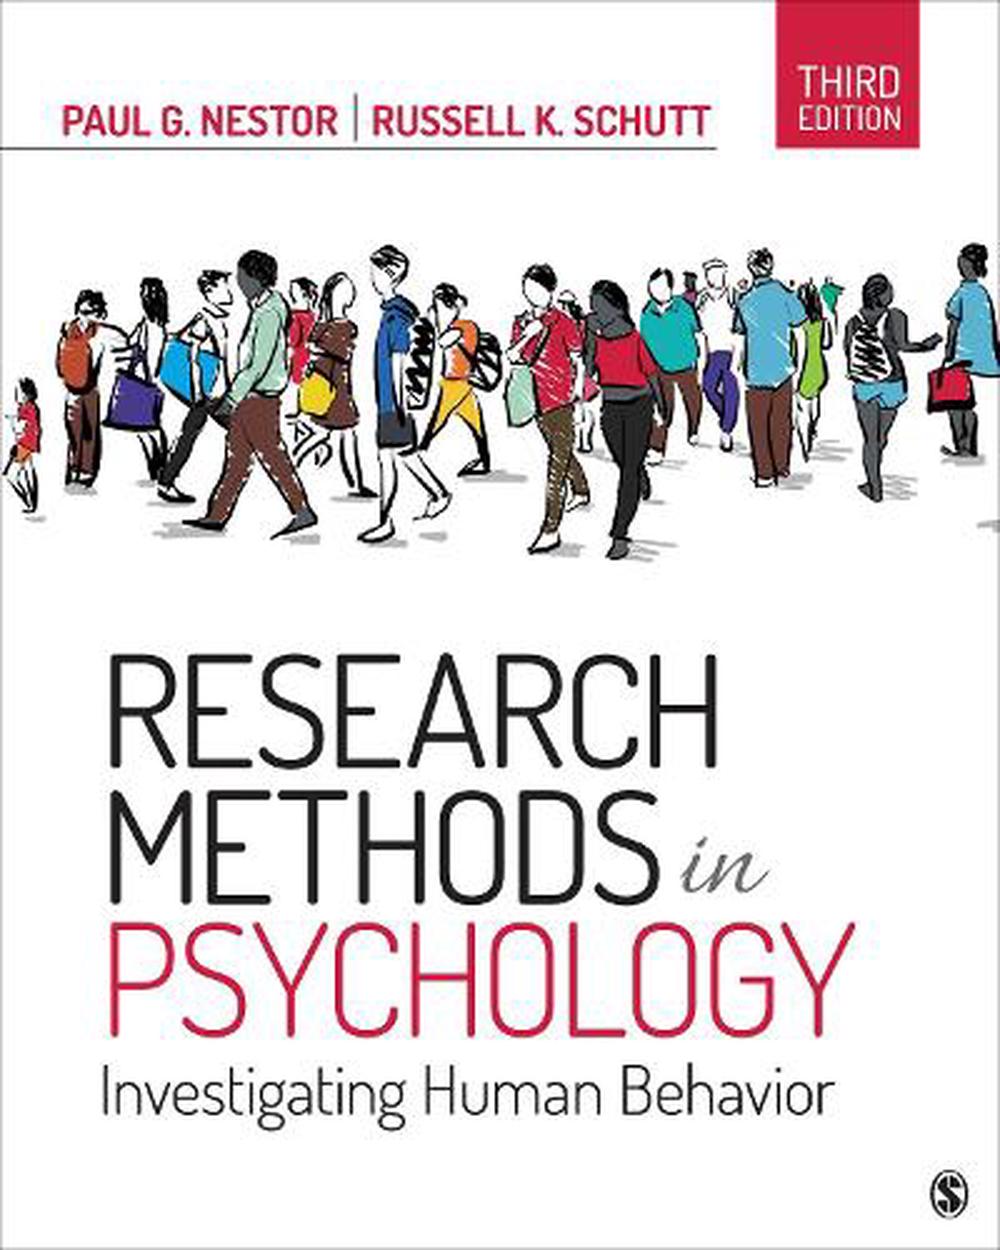 research methods in psychology book pdf